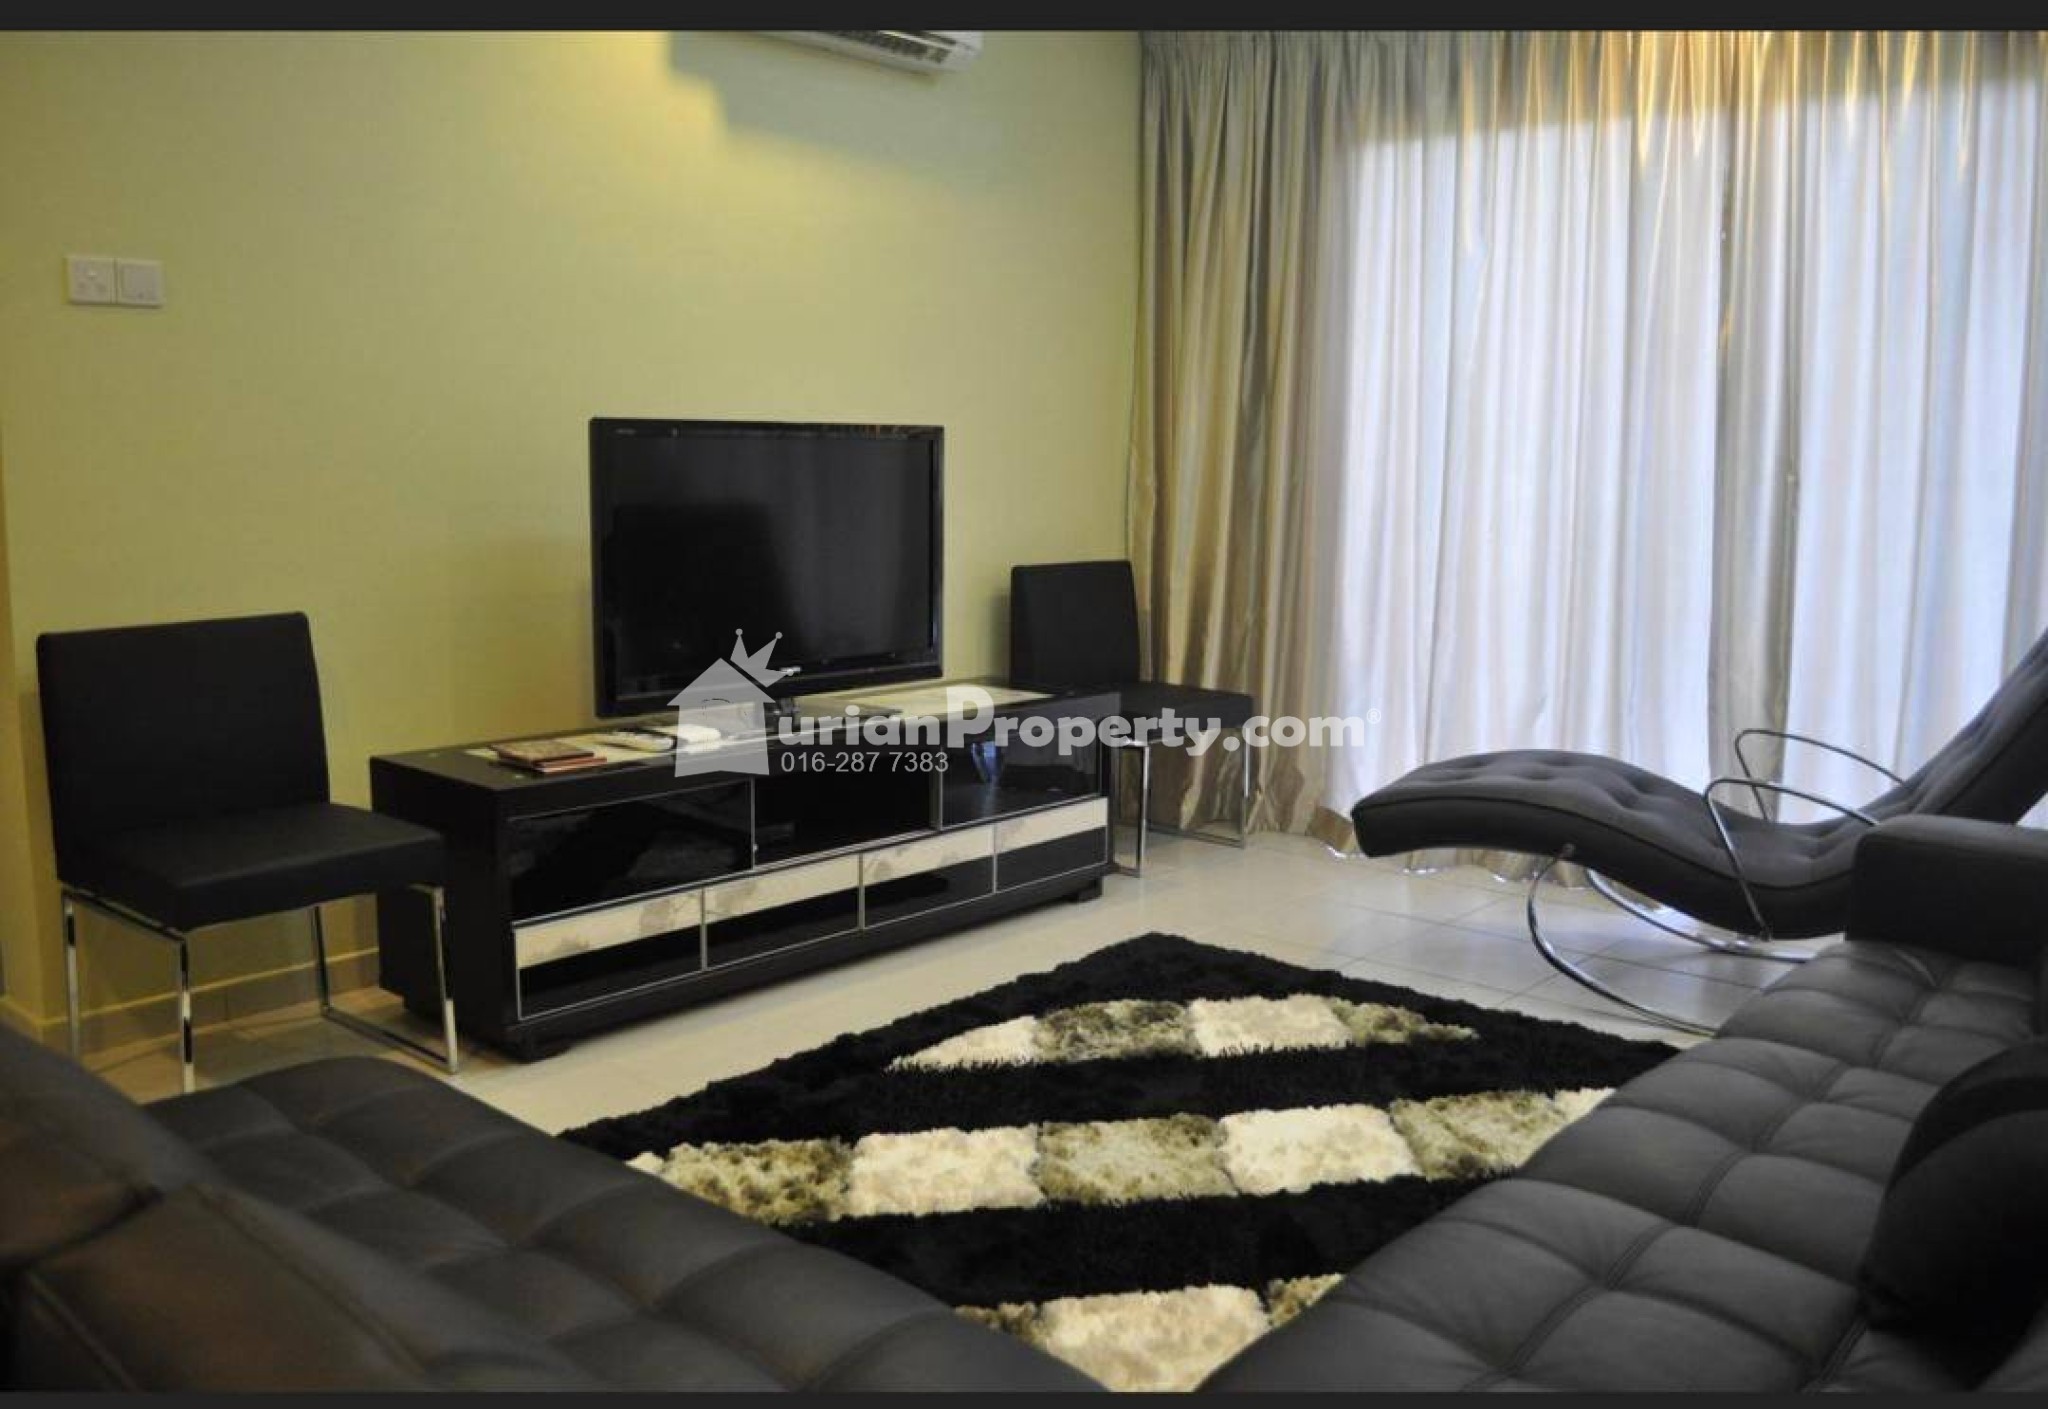 Condo For Rent at Suria Jelatek Residence